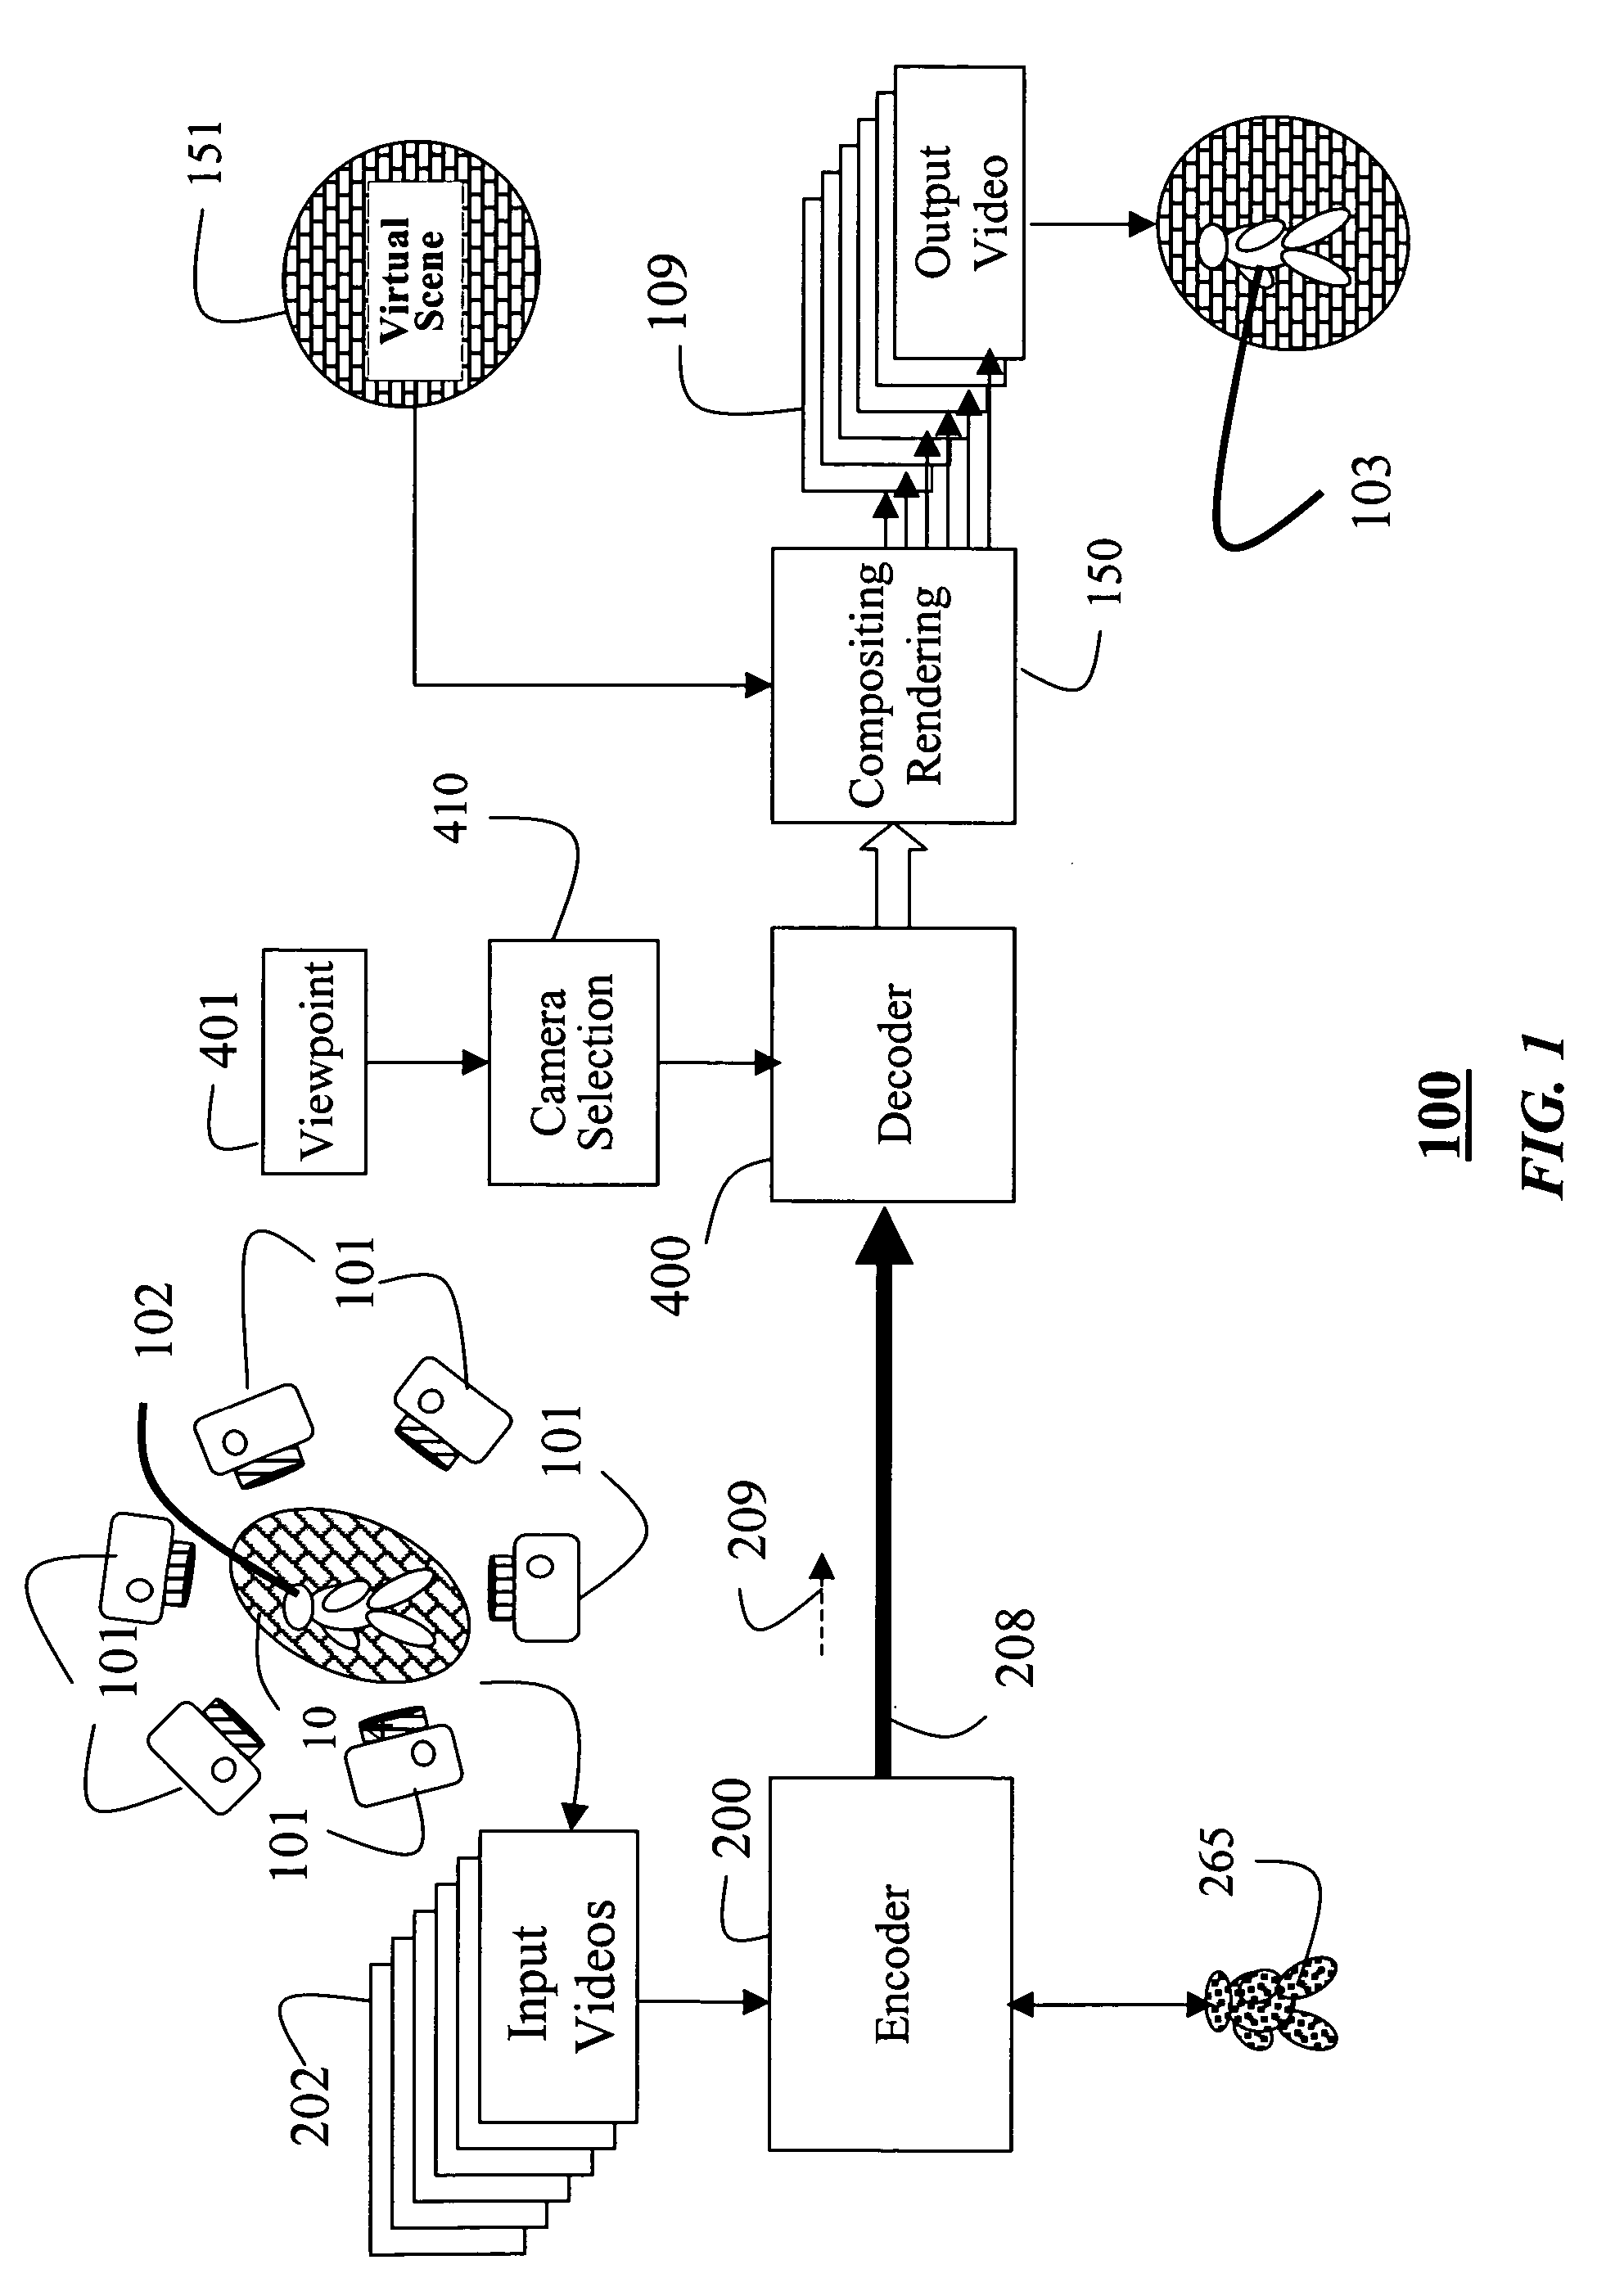 Method for encoding and decoding free viewpoint videos